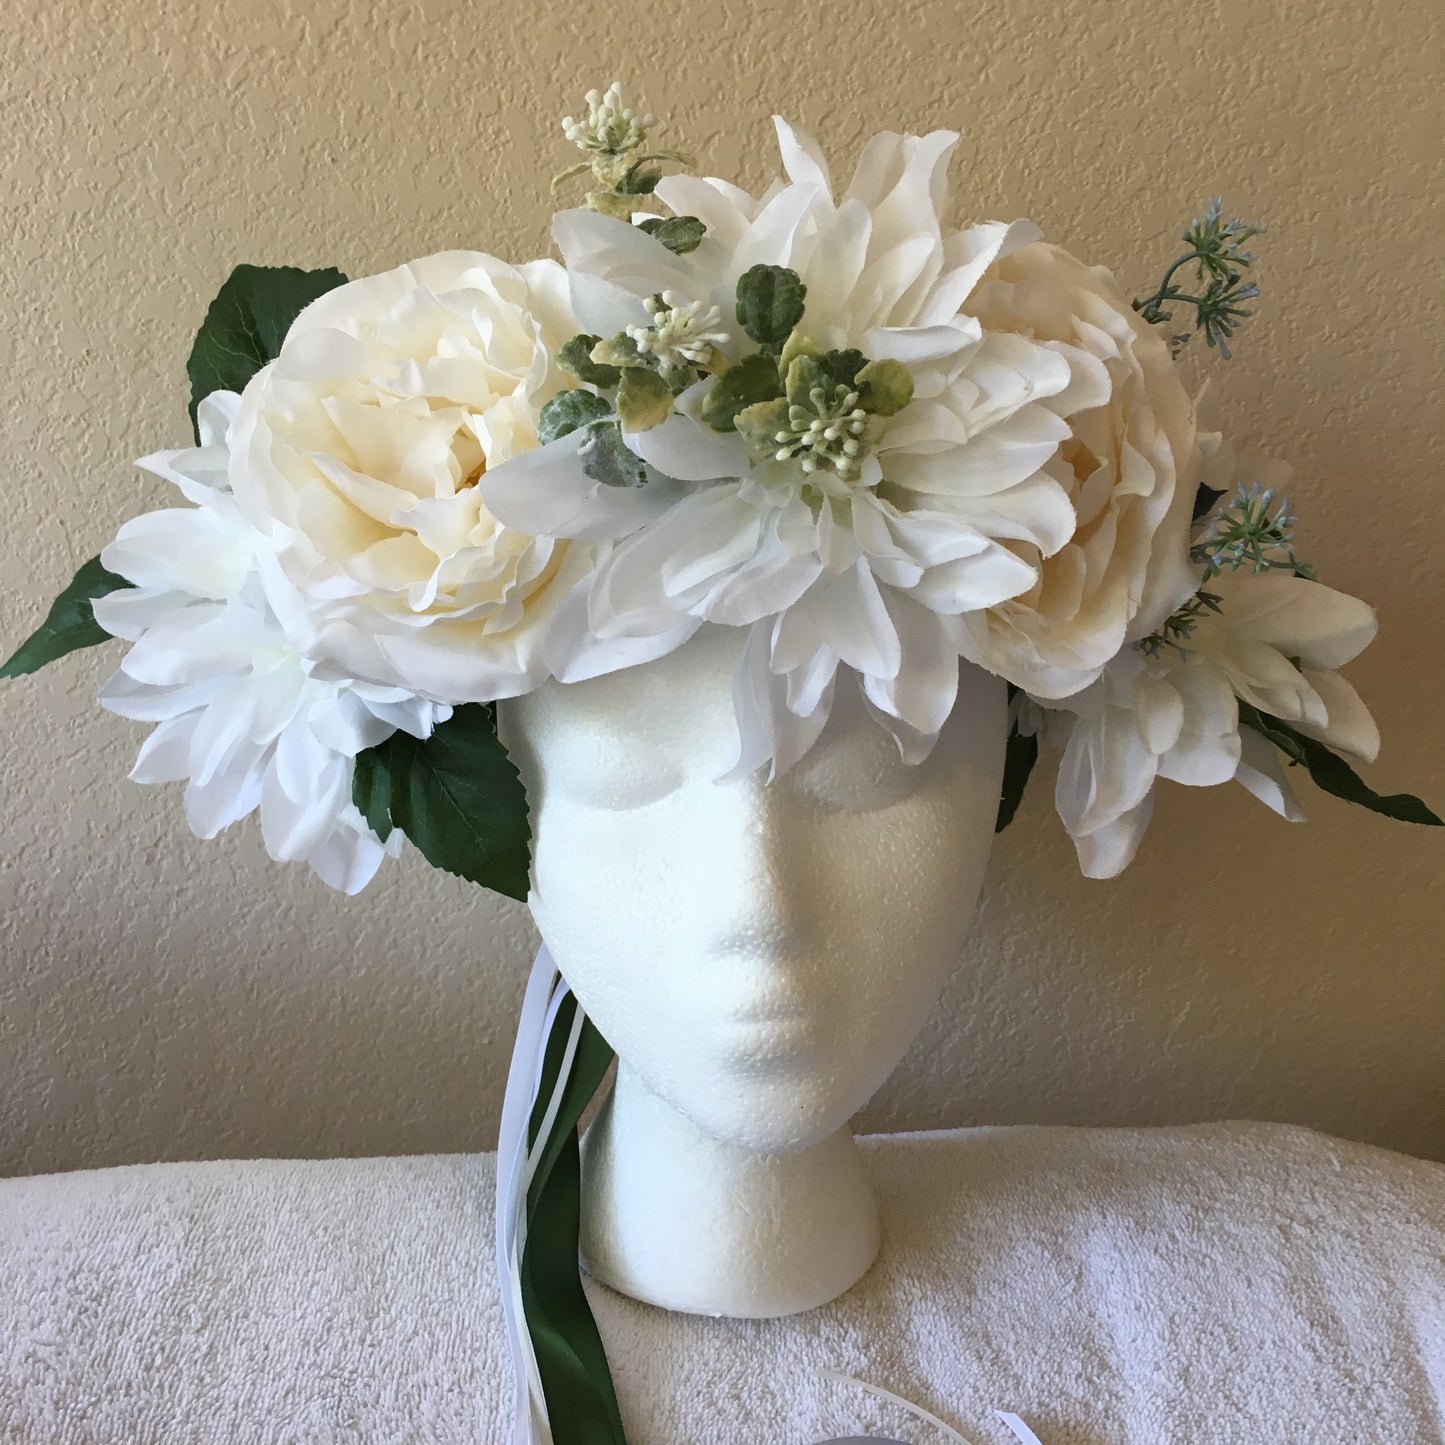 Extra Large Wreath - White & pale green flowers